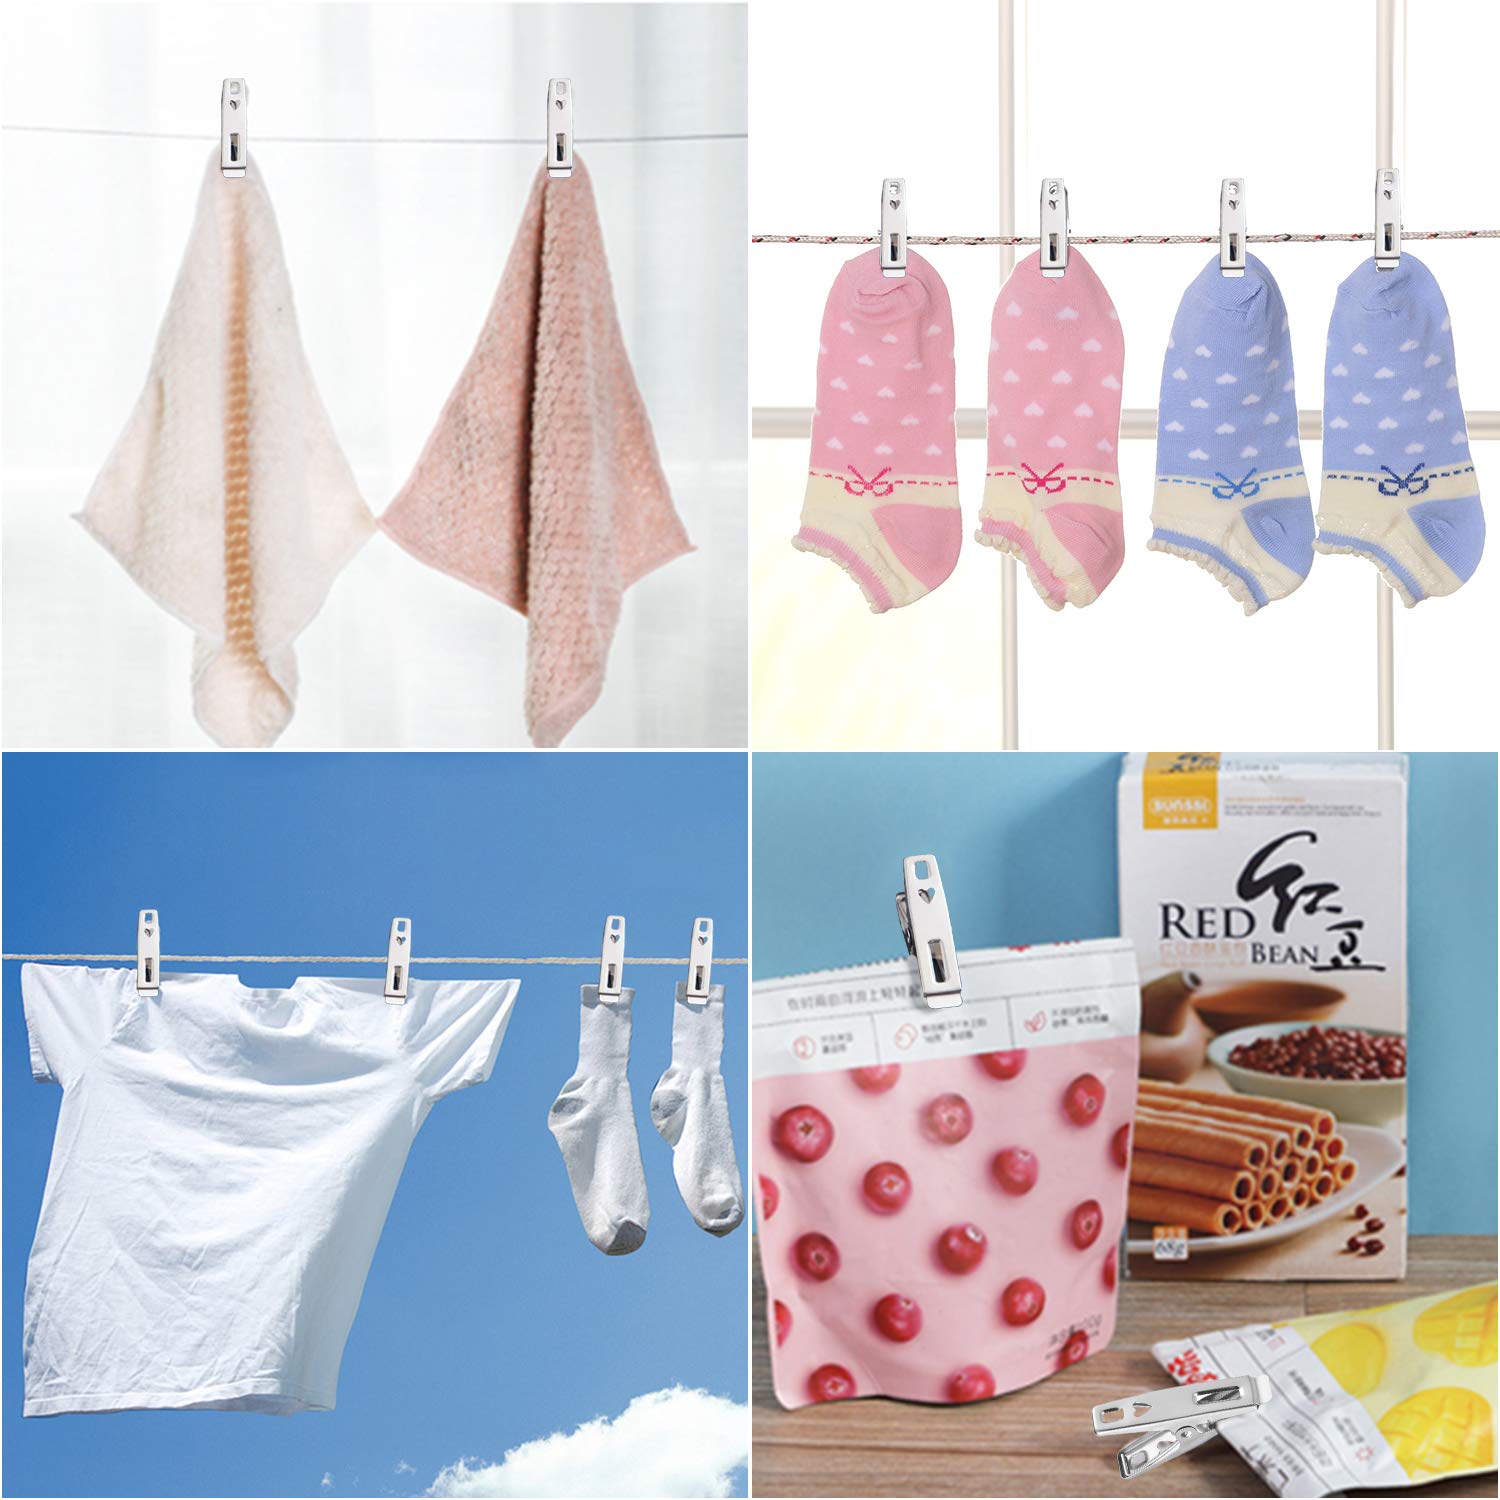 1pcs Clothes Pegs Stainless Steel Clothespins Drying Towels Socks Clothing  Clamp Bedspread Hanger Clip Laundry Cloth Pins - AliExpress